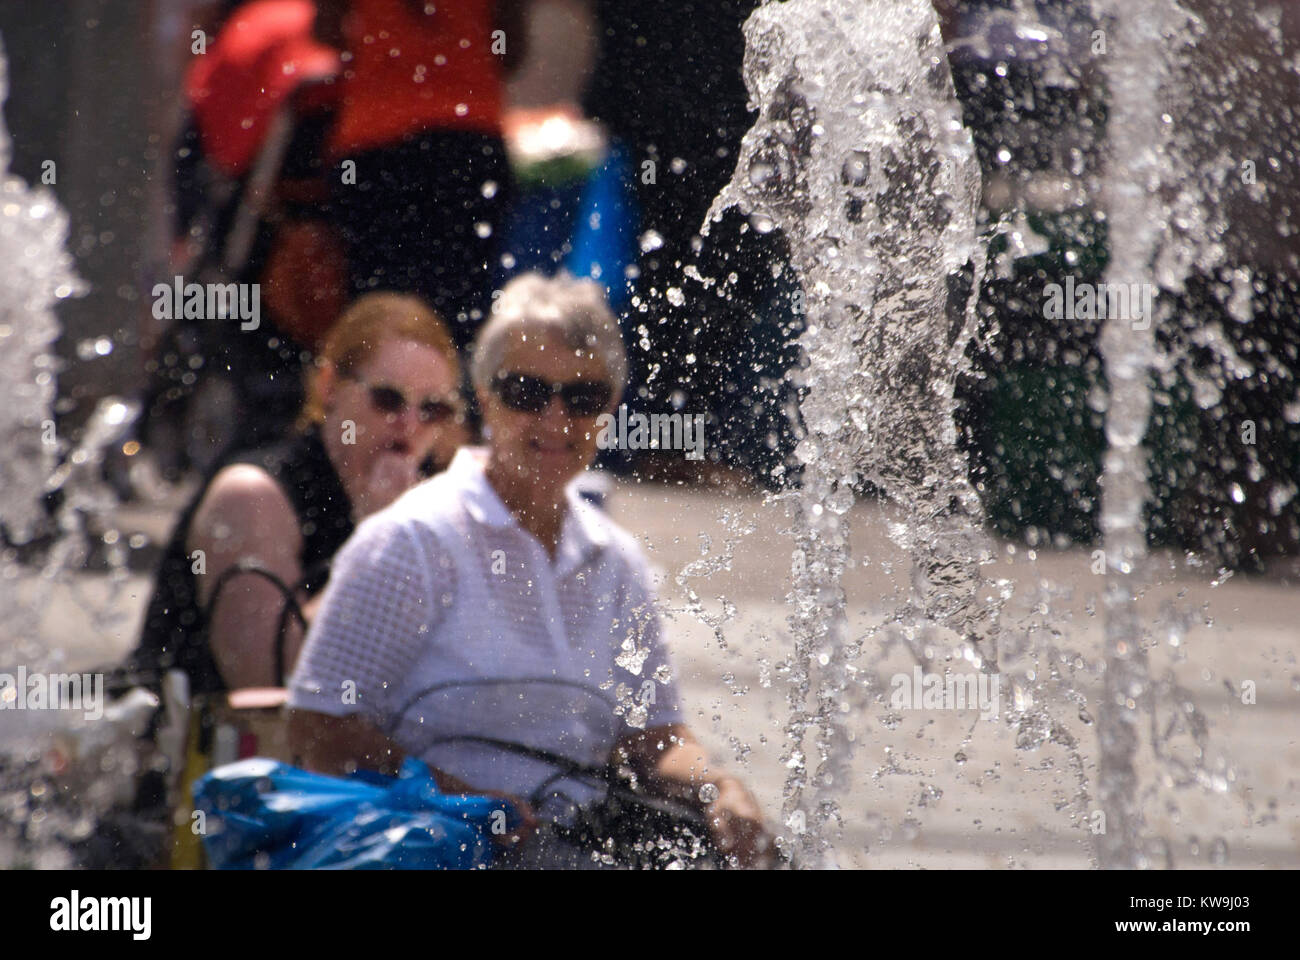 Fountains in outdoor market square, Stockton-on-Tees Stock Photo